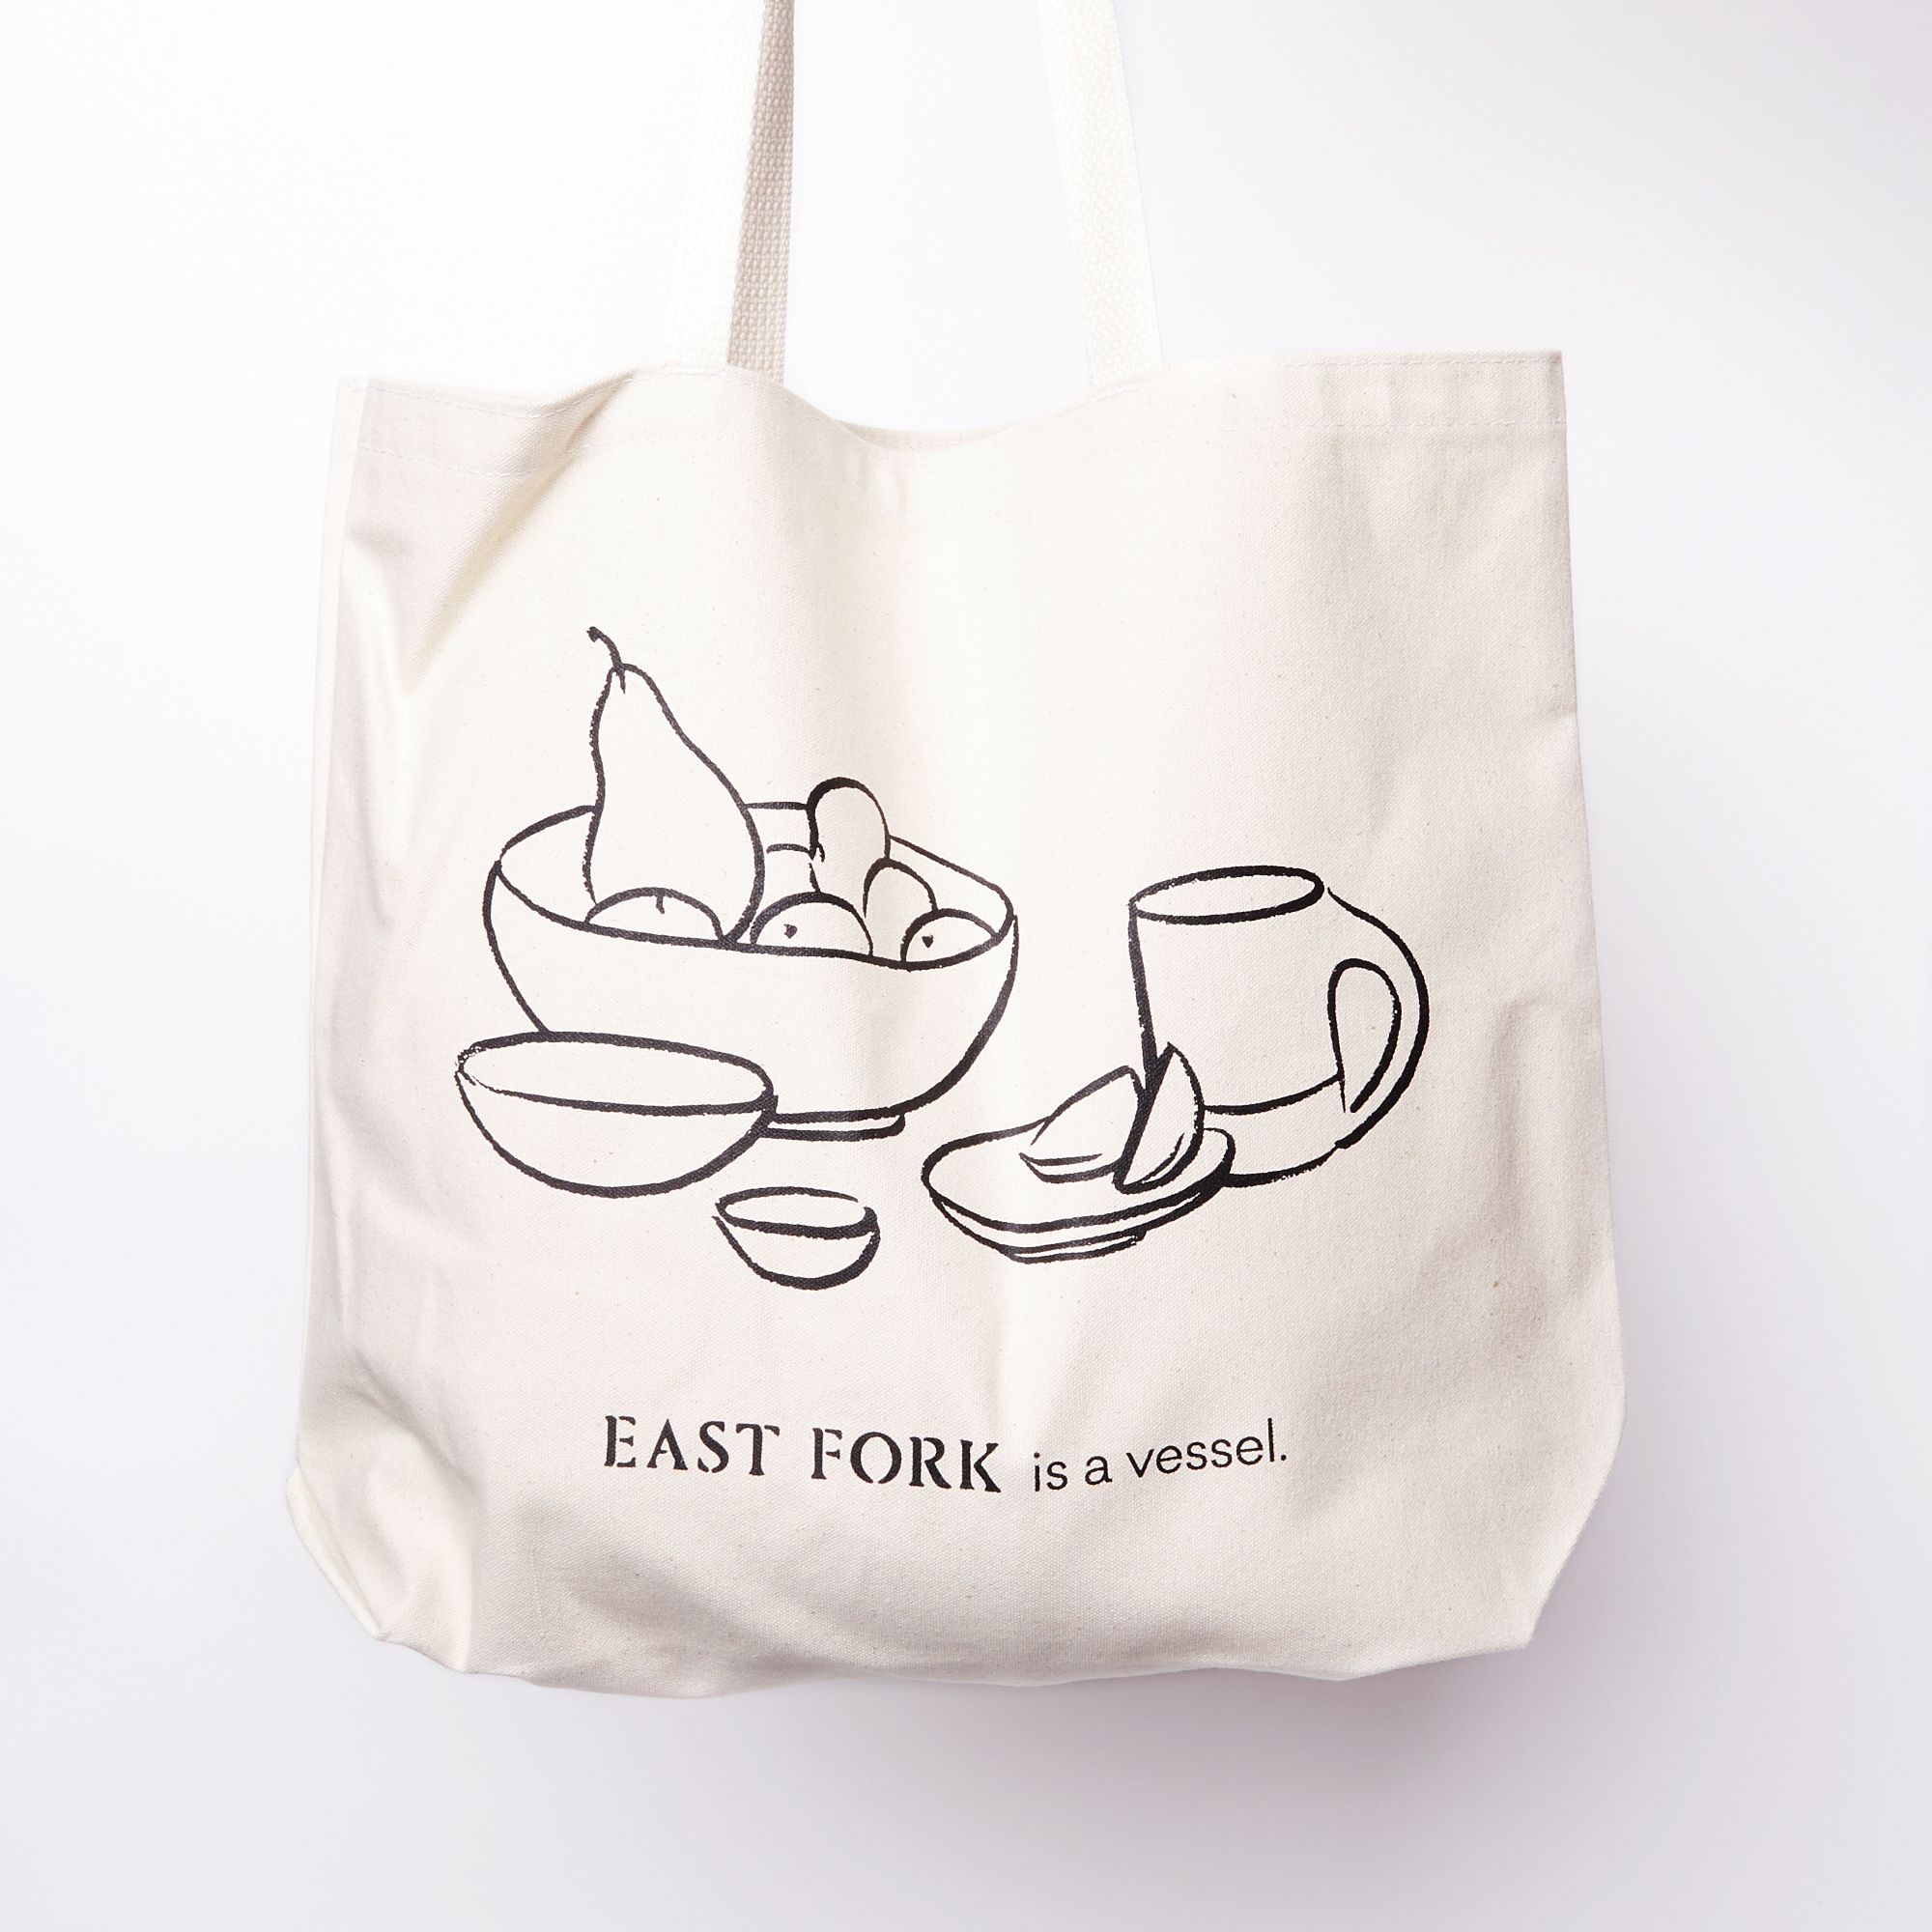 Cream canvas tote with a charcoal illustration on the front of a bowl with fruit, little bowls, plate, and a mug. Underneath, it reads 'East Fork is a vessel'.